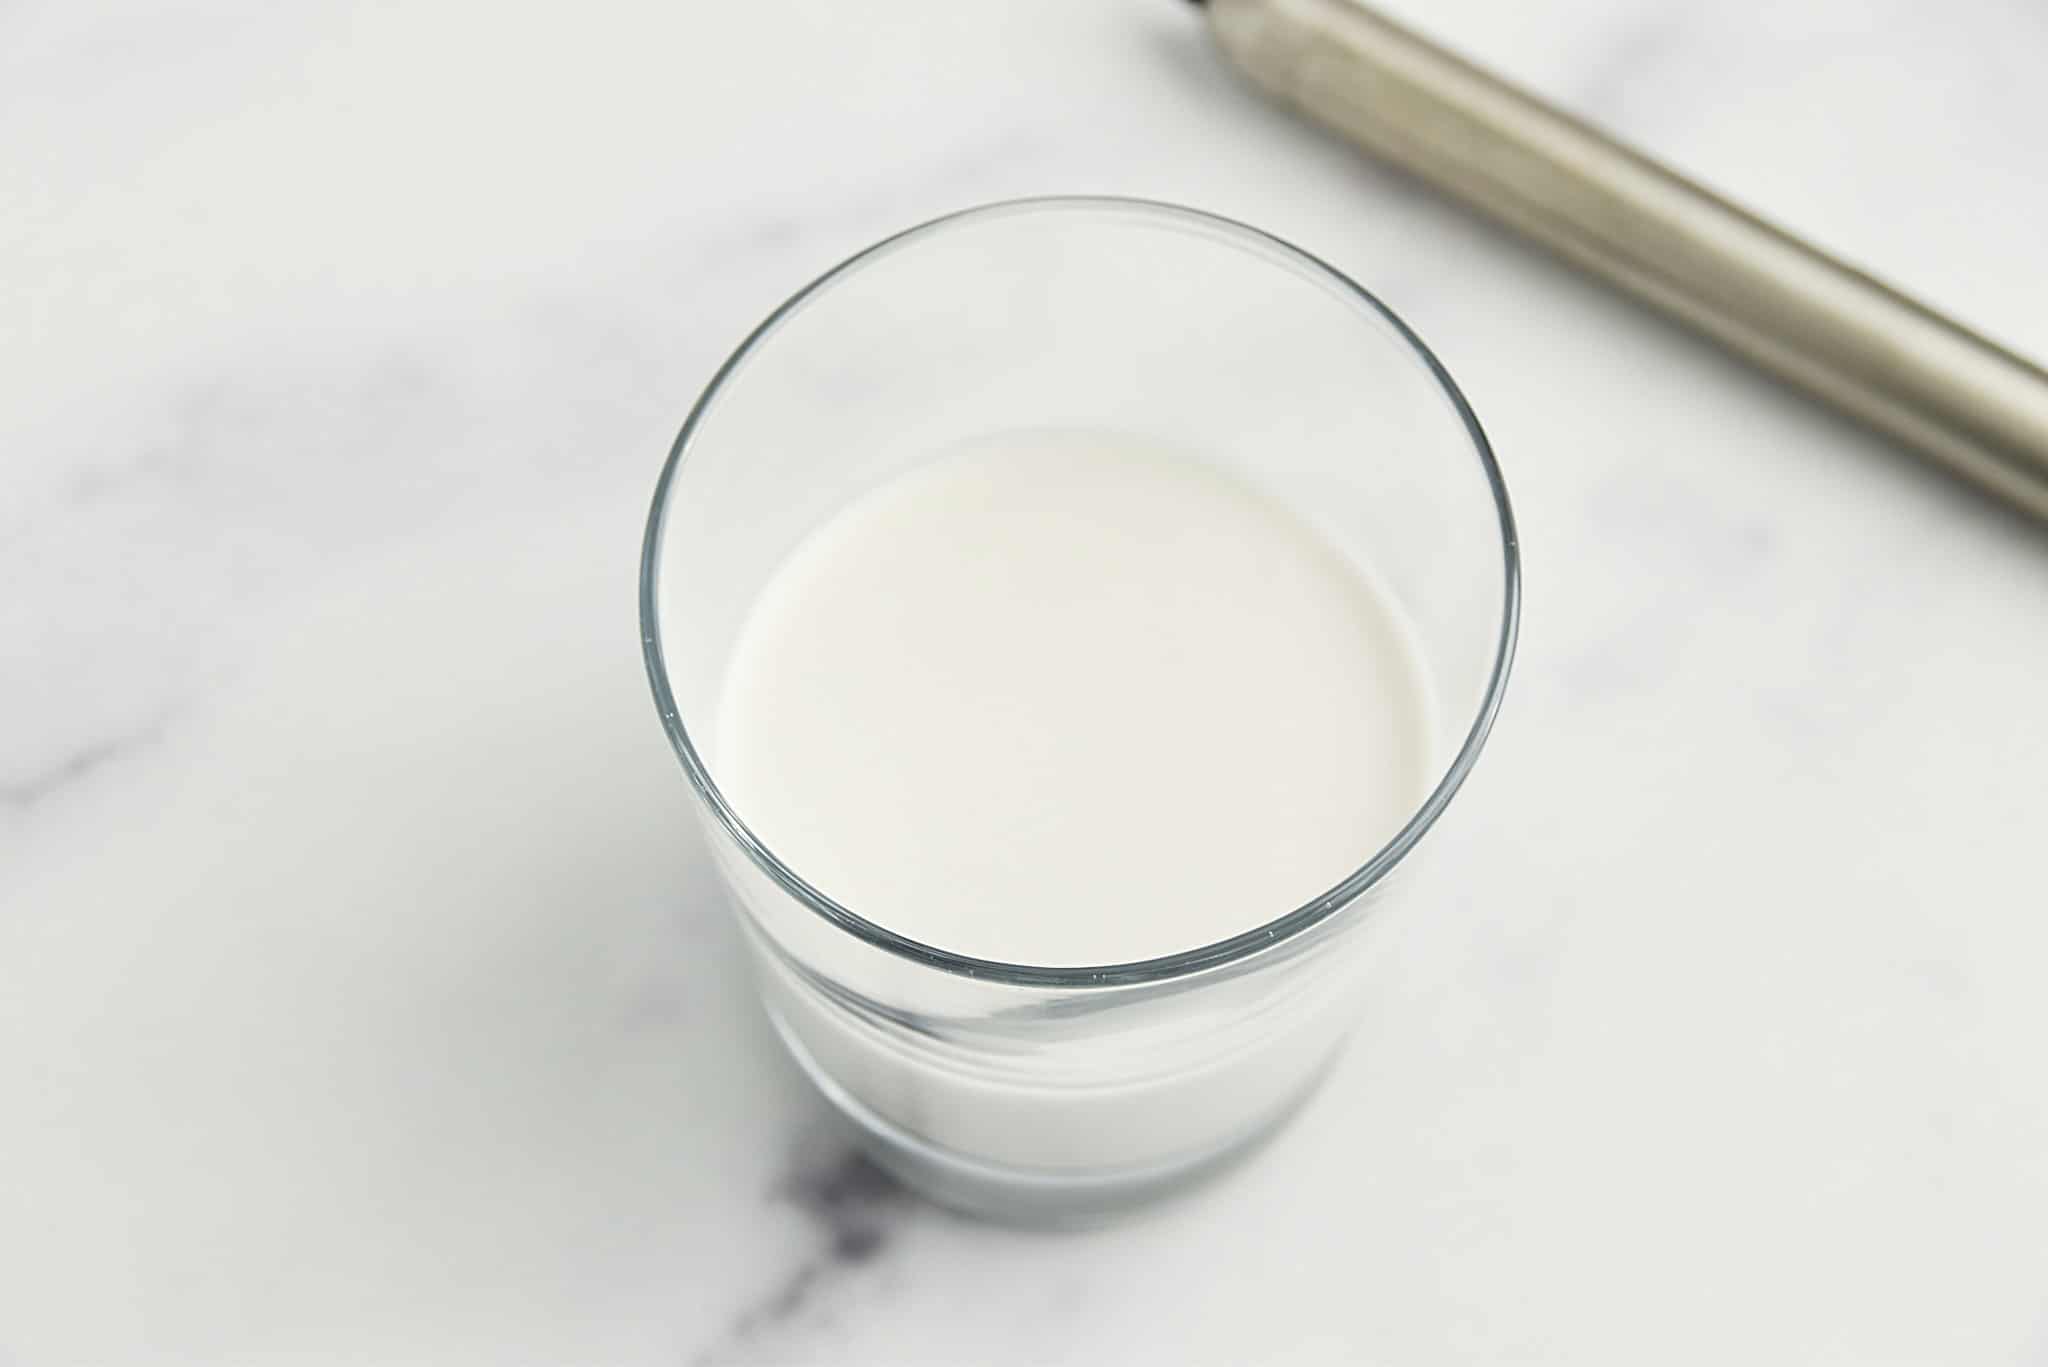 Thawed and blending milk in a glass. 